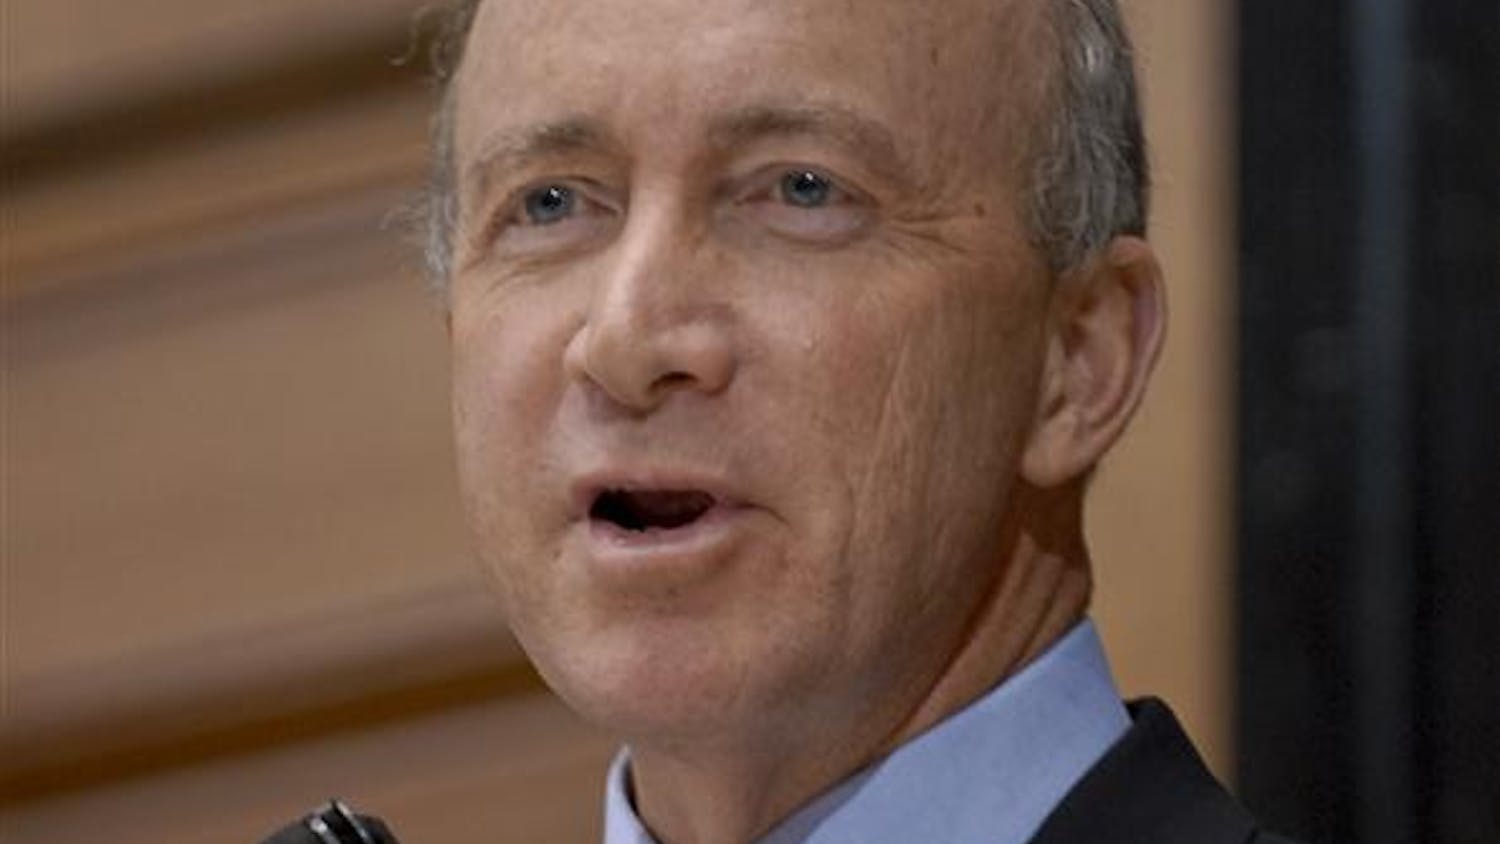 Indiana Governer Mitch Daniels gives his State of the State speech in the Indiana House Chambers Tuesday evening in Indianpolis. During his speech, Daniels stated there would be no tax increase for the 2009 year.